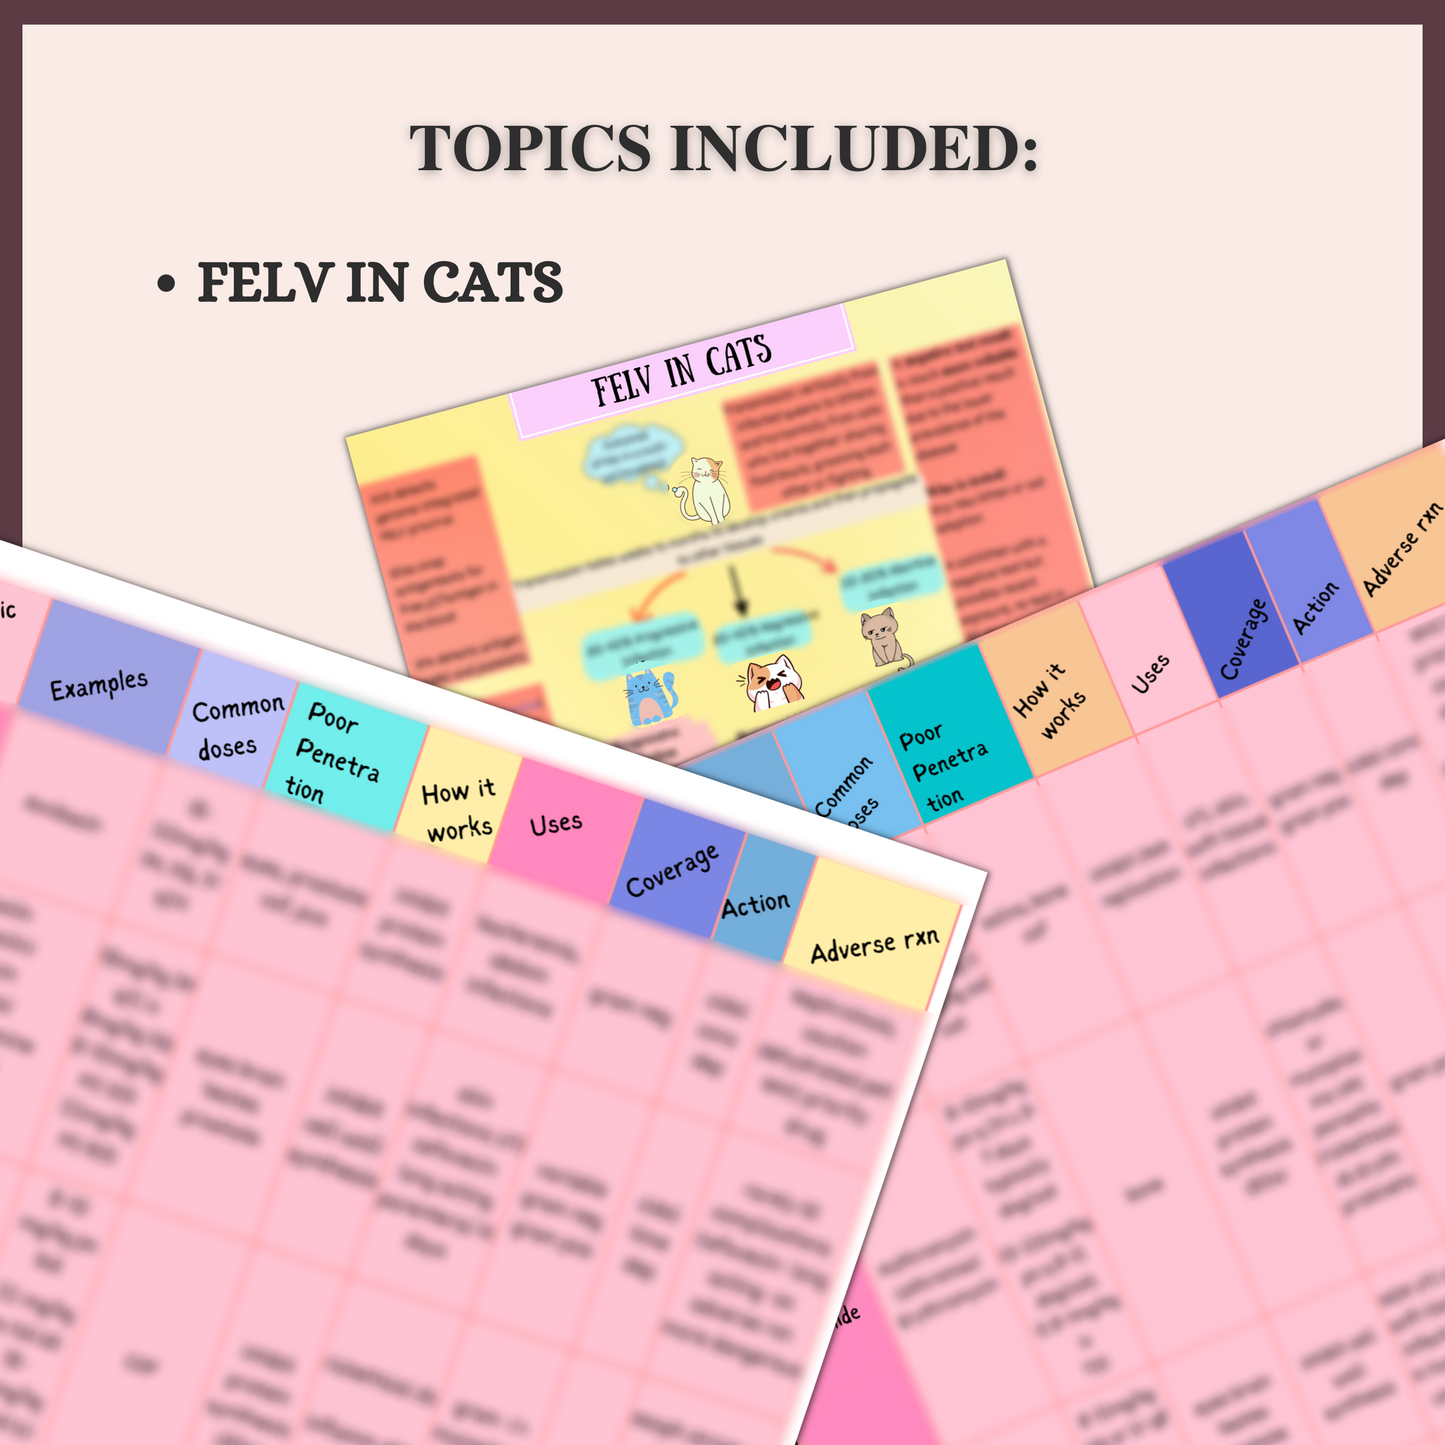 FELV IN CATS |3 PAGES | 1 TOPIC